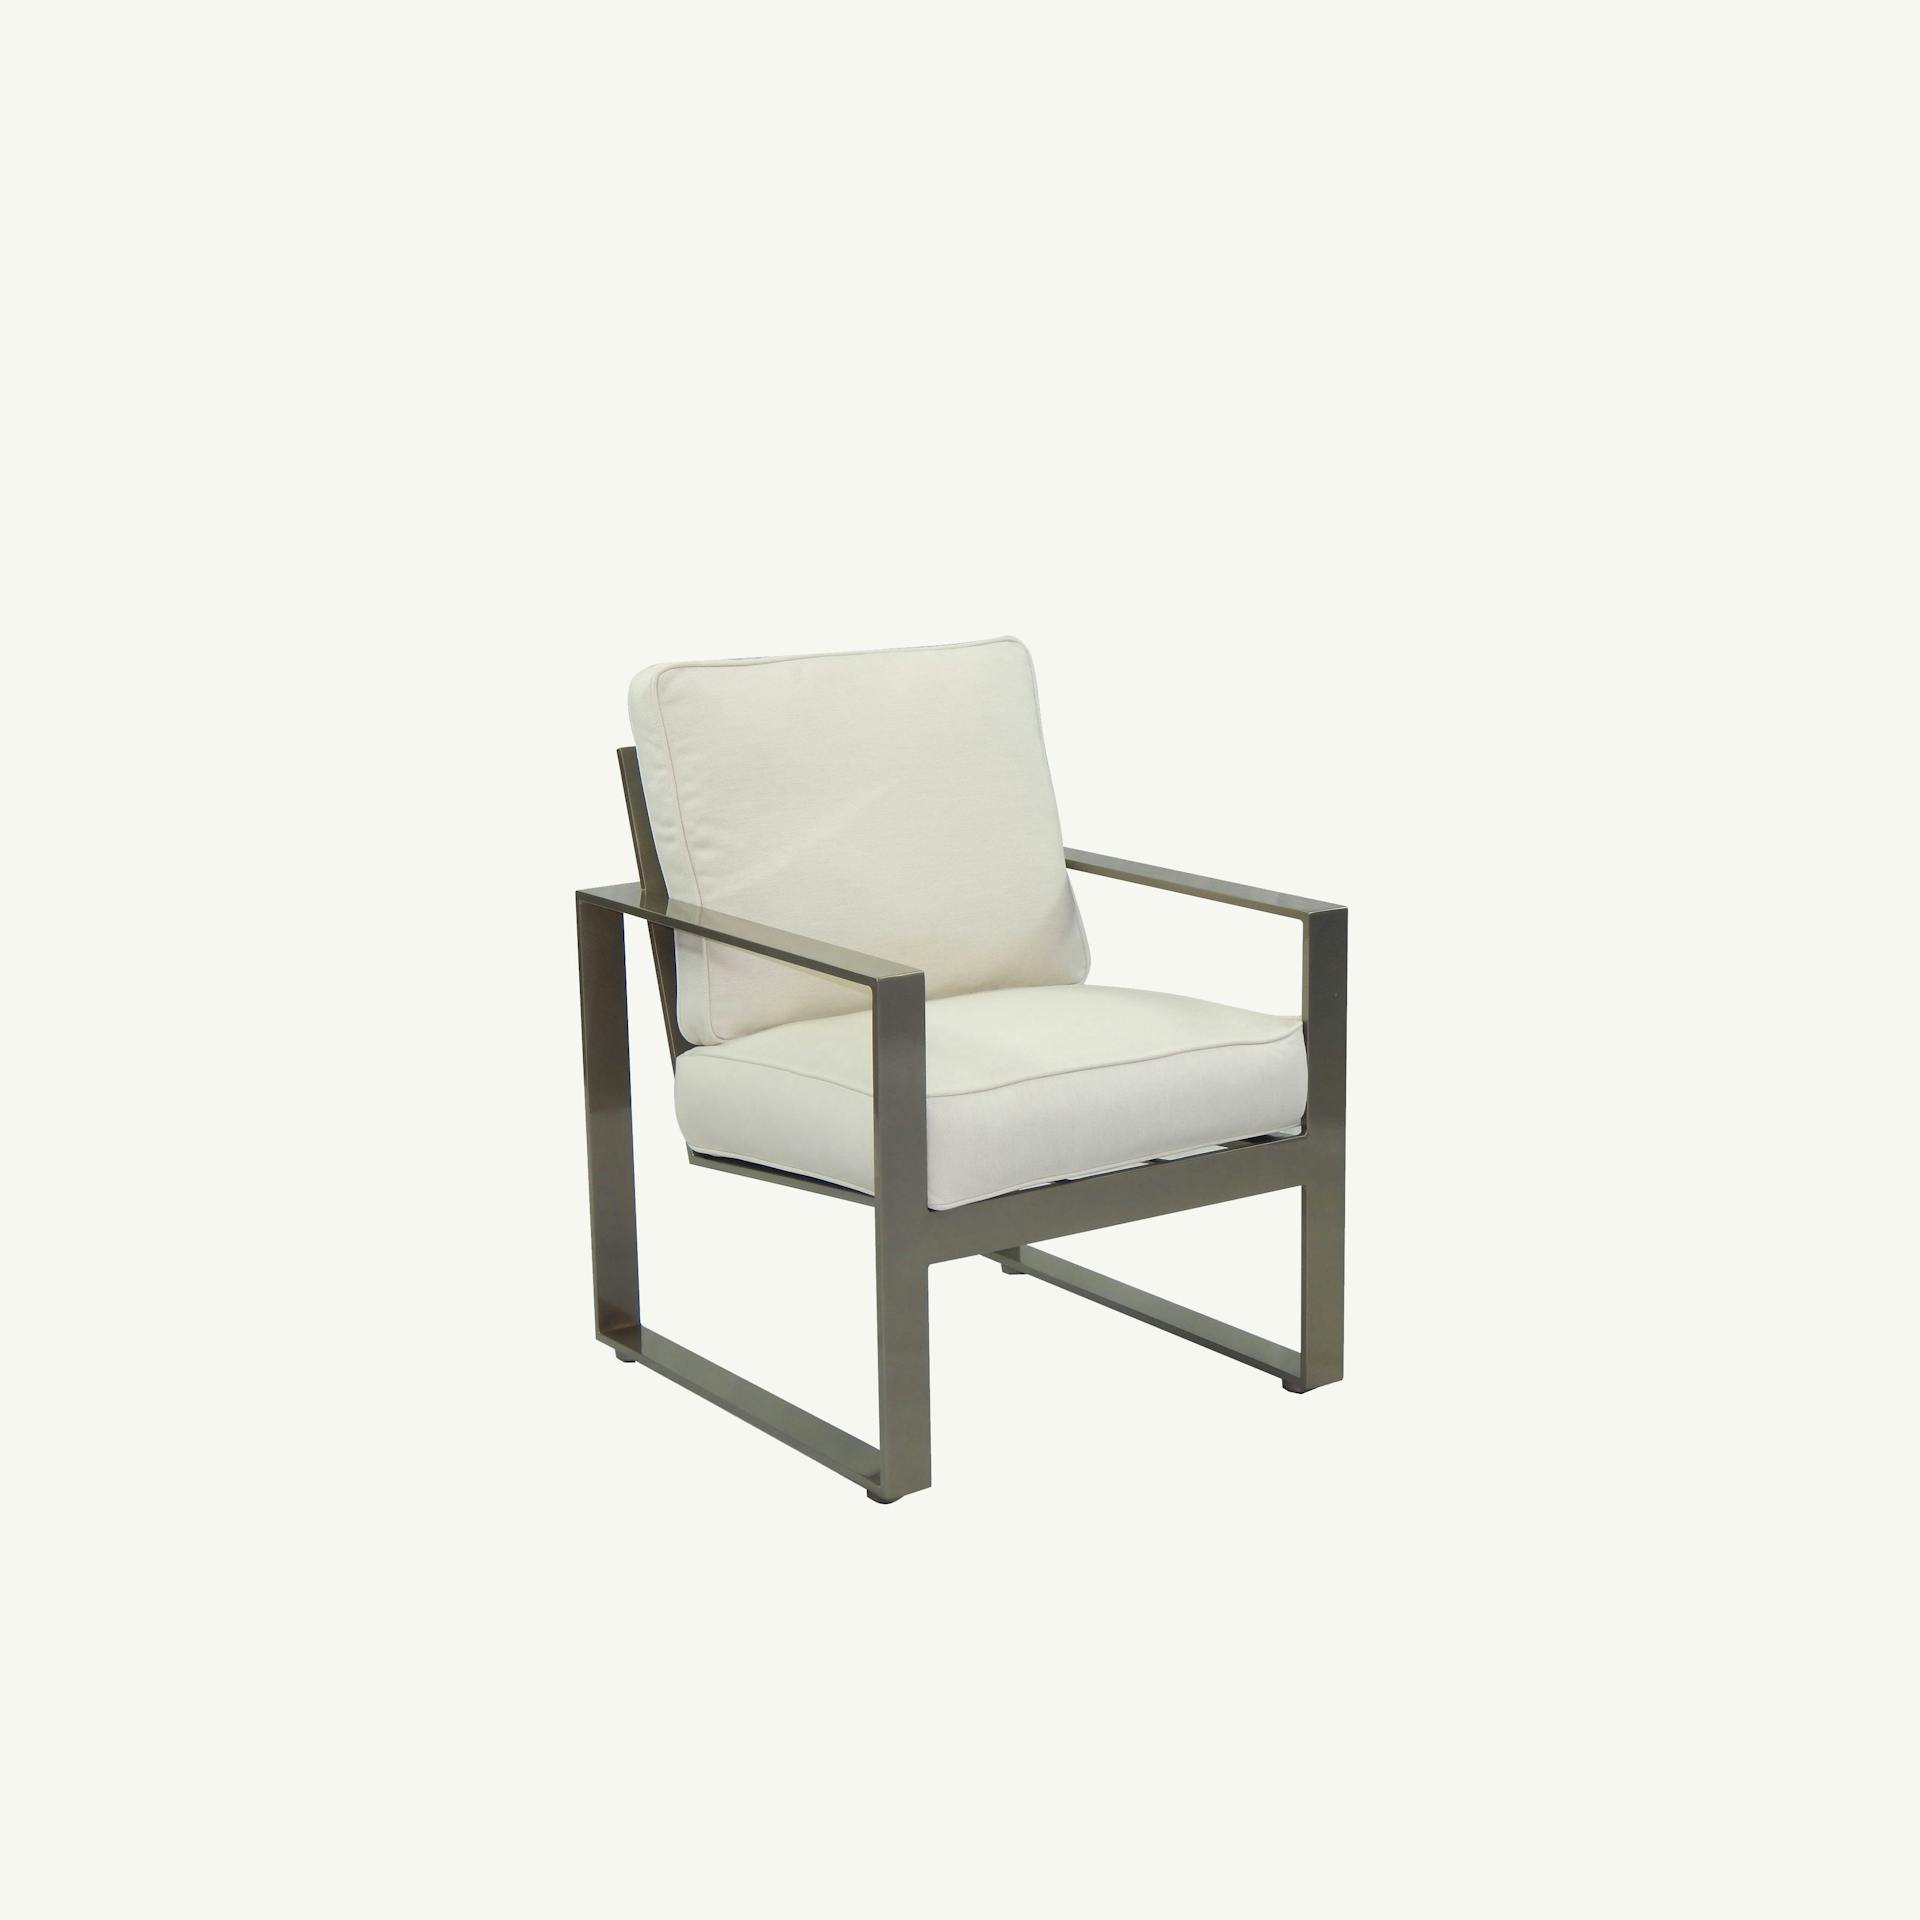 Park Place Cushioned Dining Chair